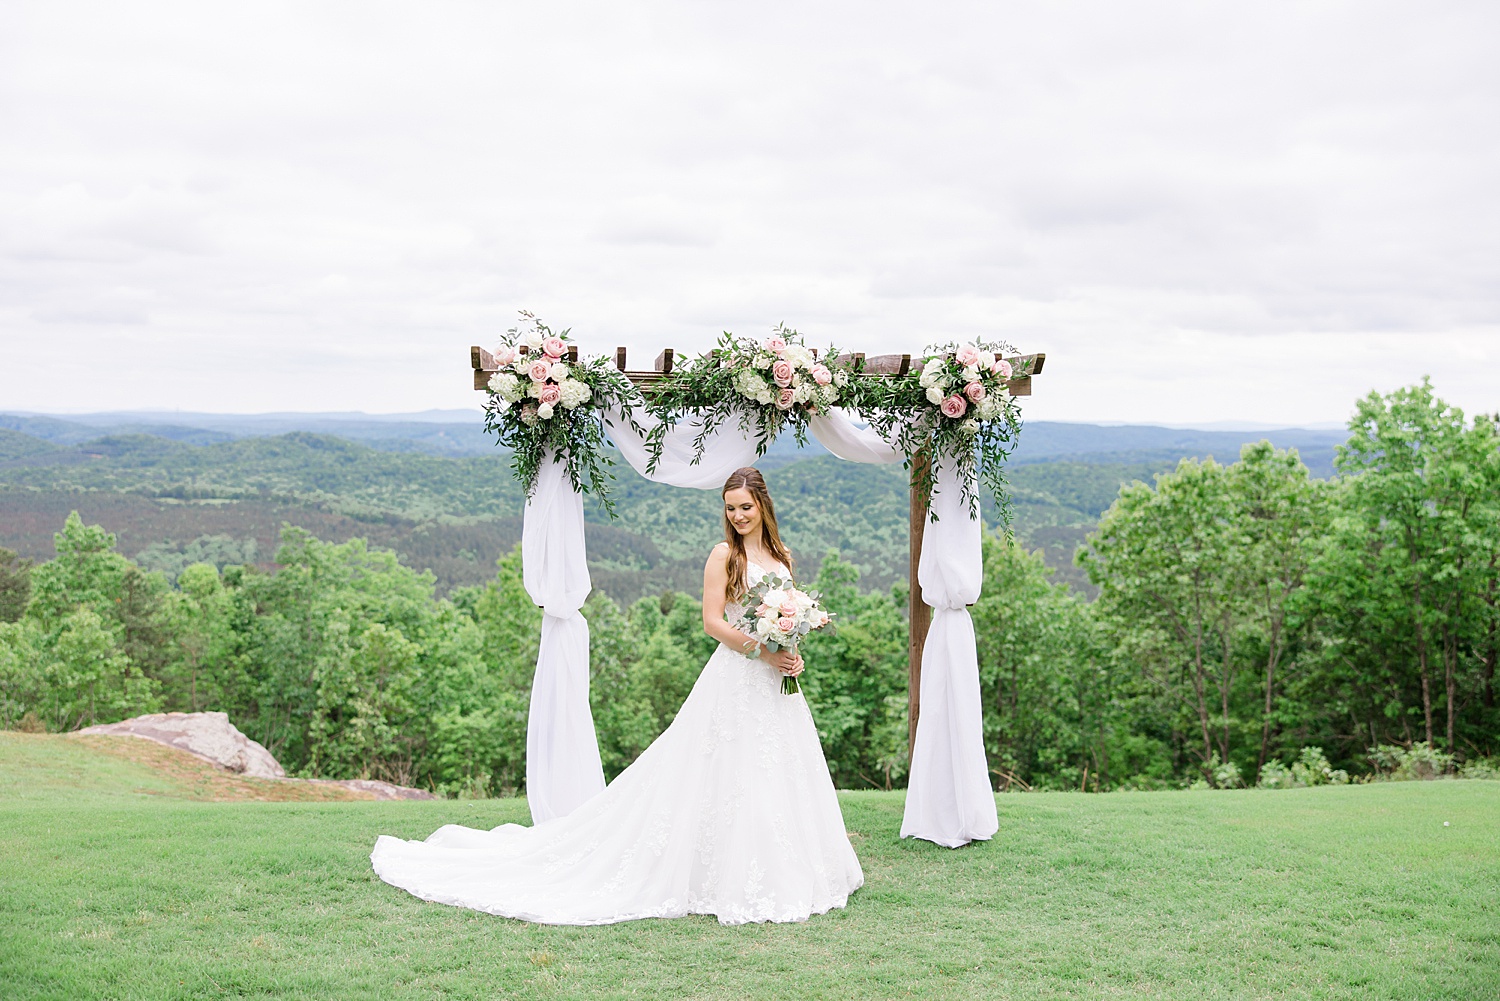 bride portraits under ceremony arch before Romantic Spring Wedding at Weddings at Cabin Bluff